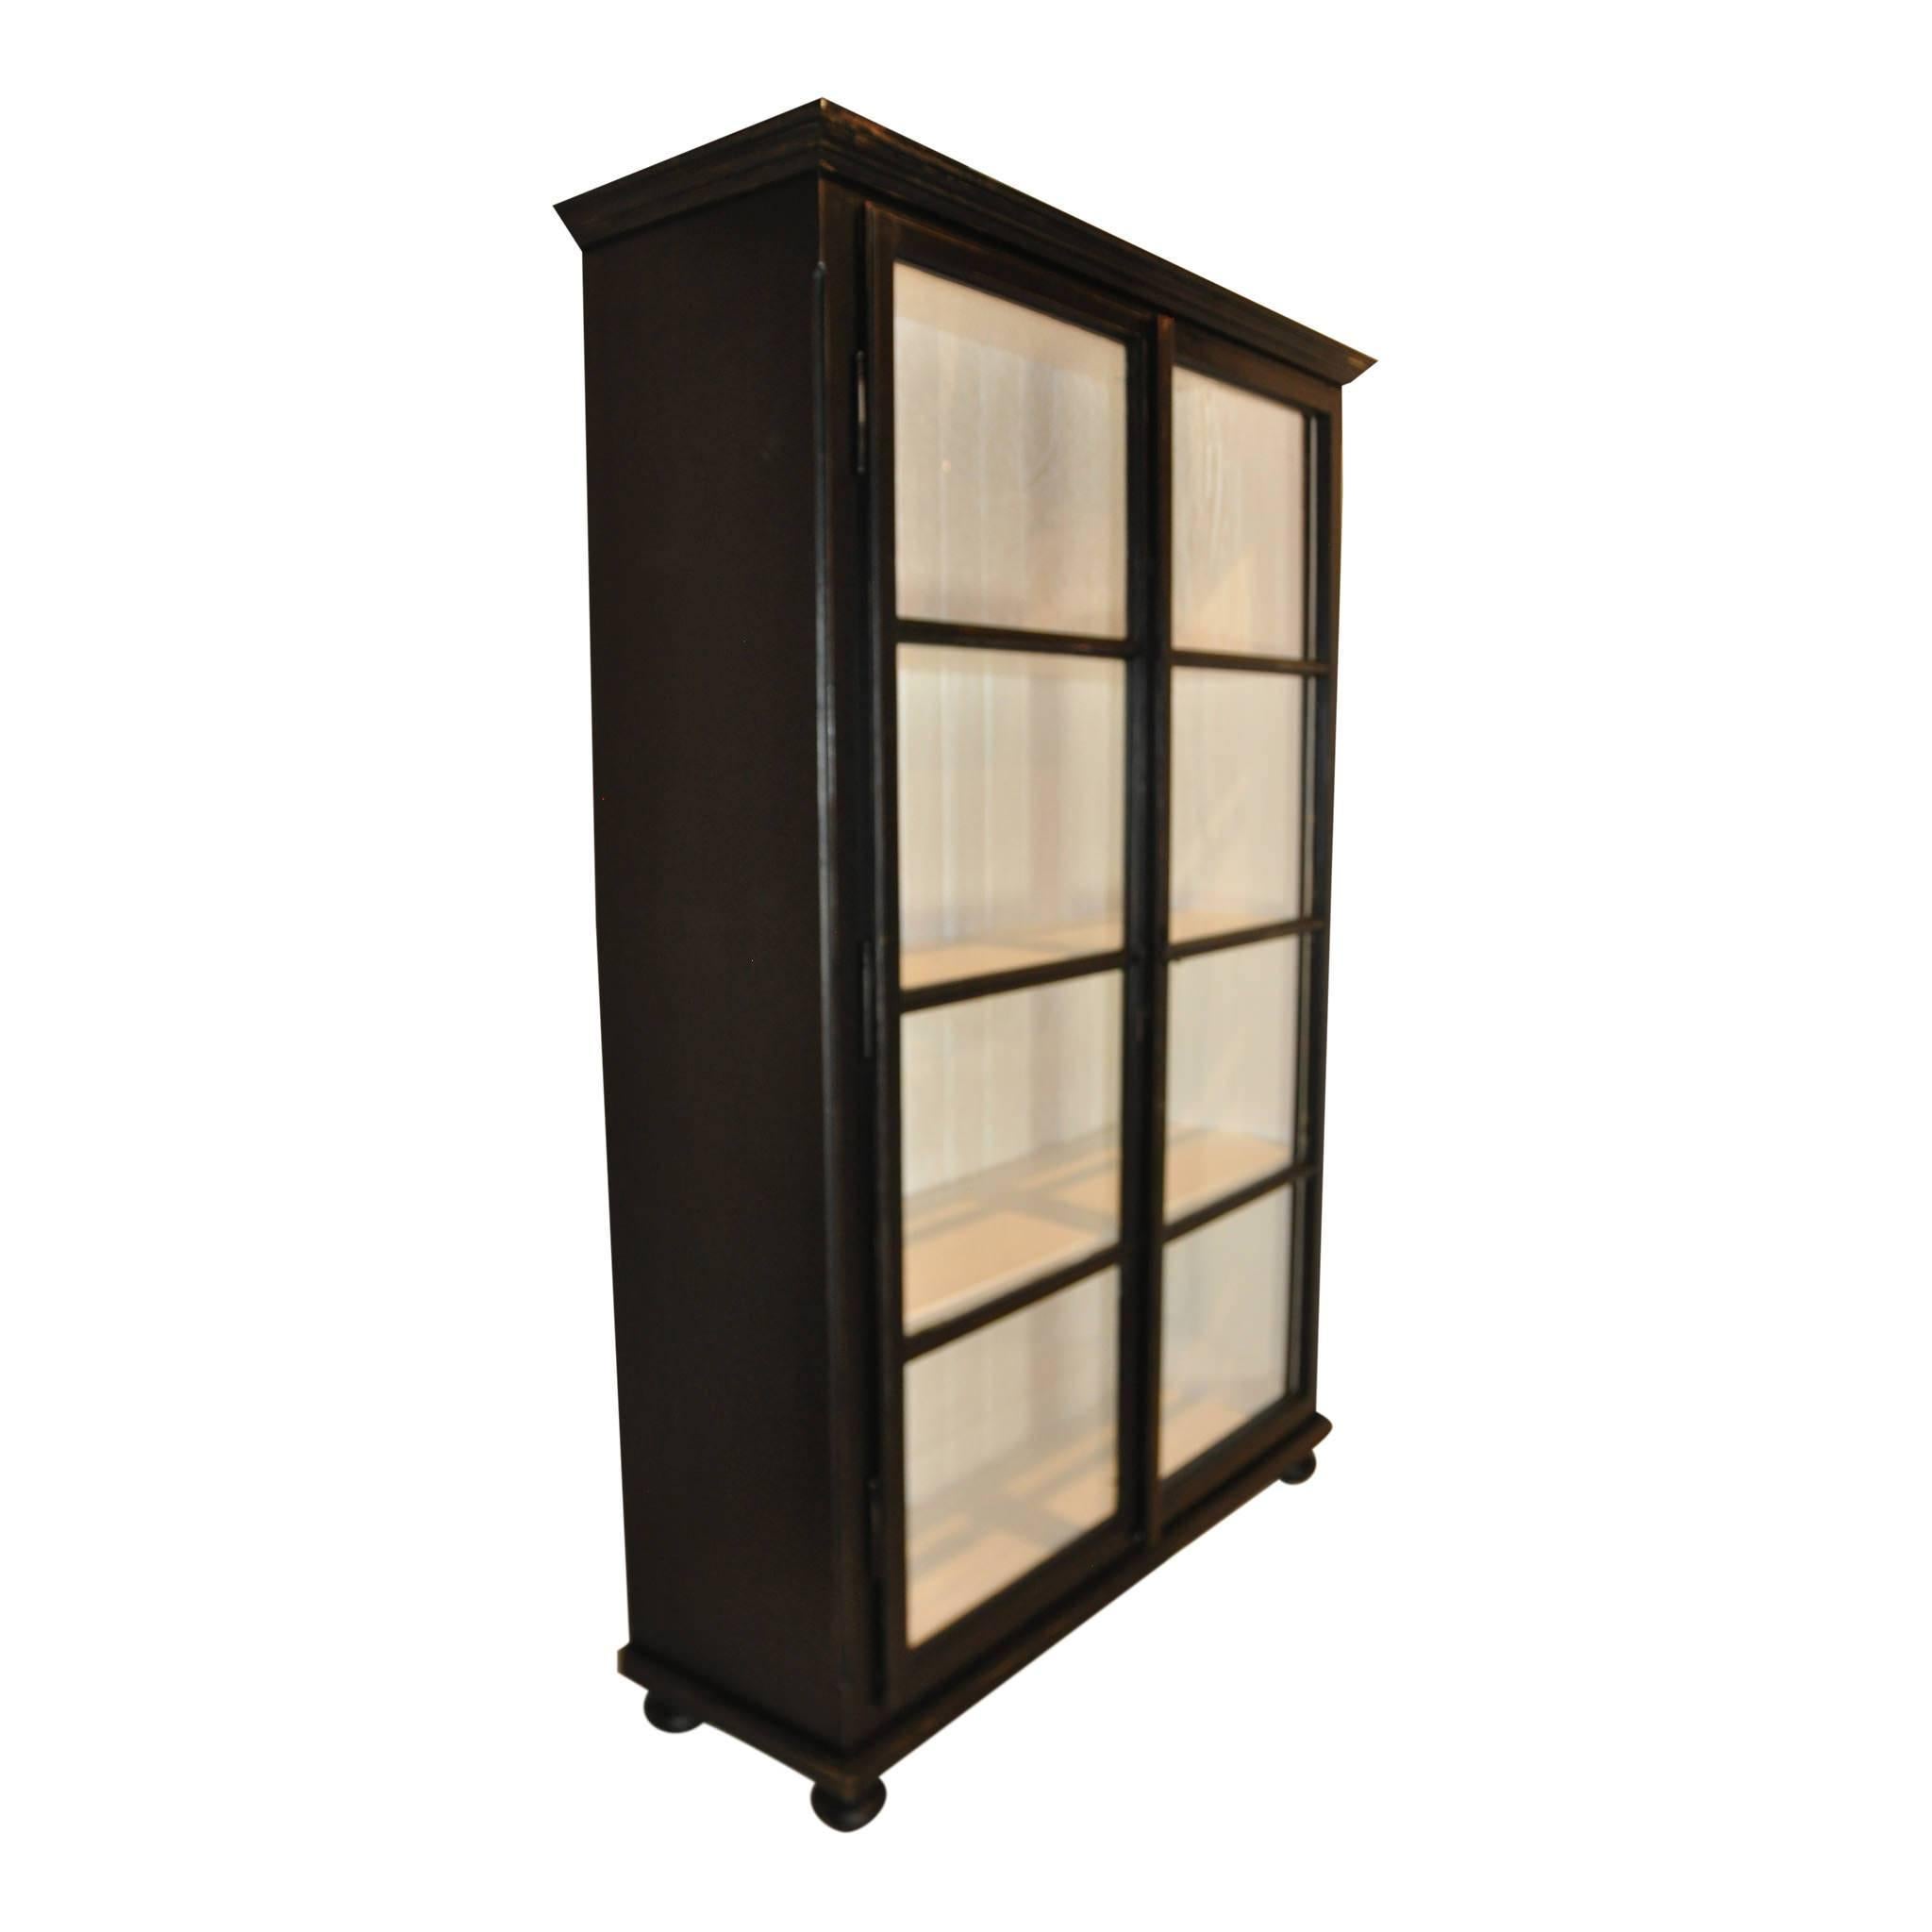 The contrast of the white interior and black exterior of this cabinet makes it a striking piece. Three fixed shelves are visible through the glass panel doors which latch closed. The top is trimmed with crown molding. The cabinet sits on bun feet.